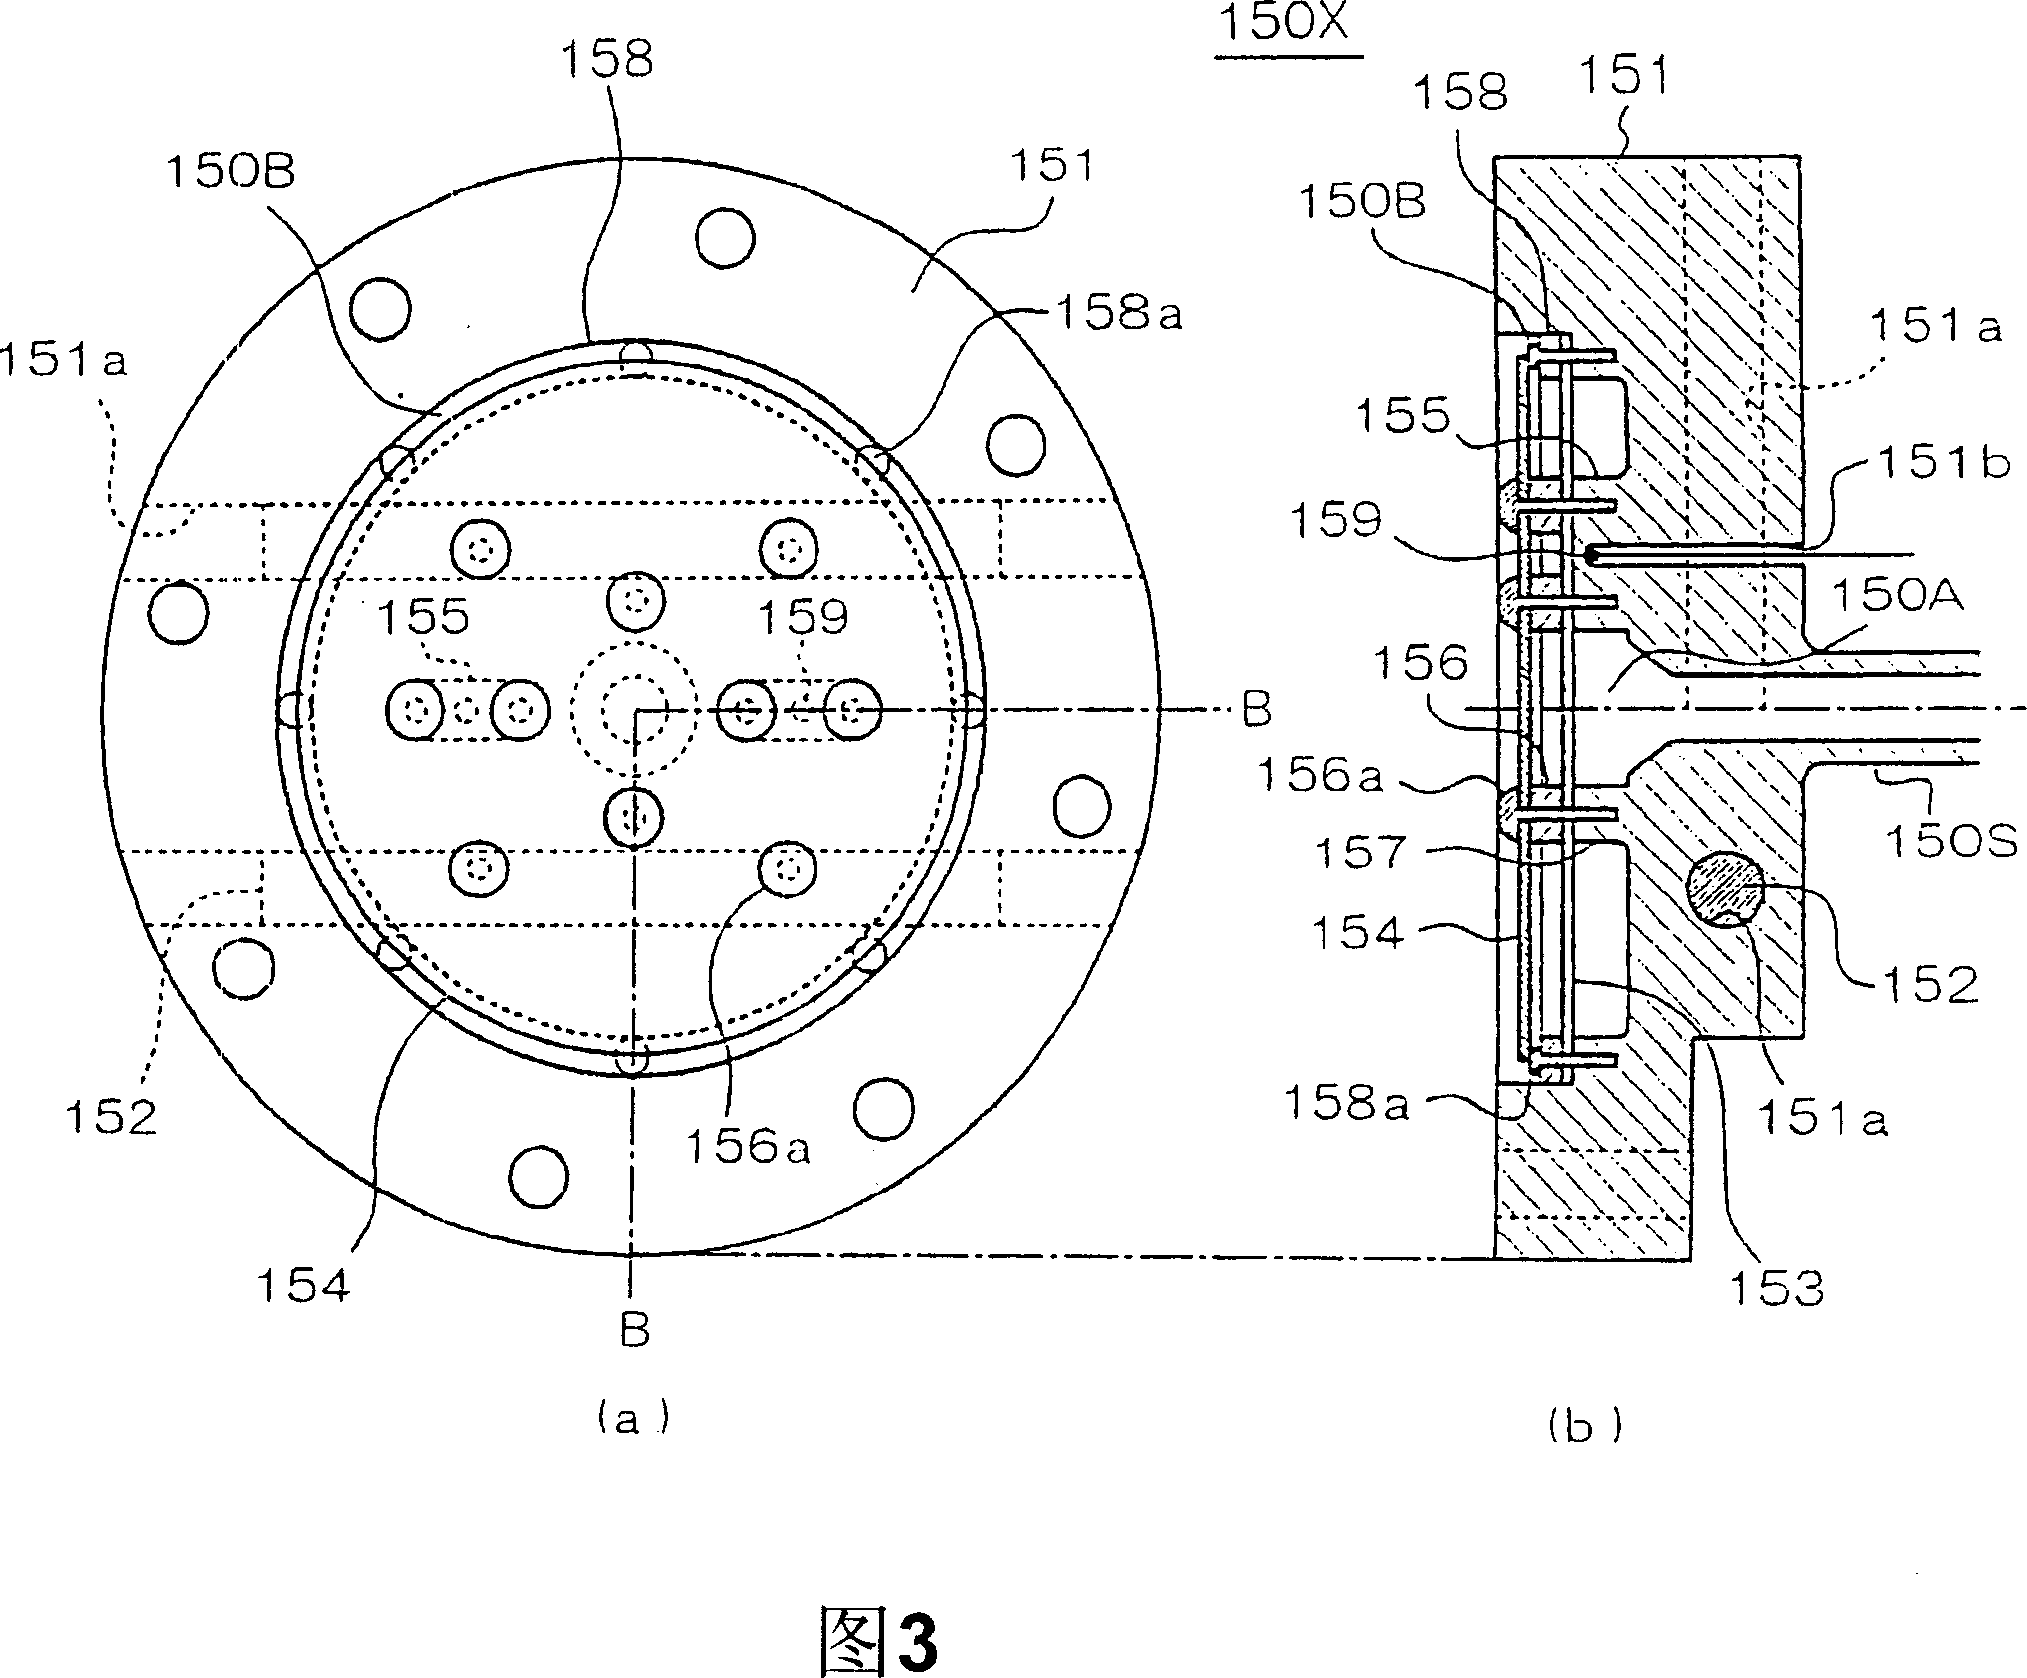 Film forming apparatus and gasifier